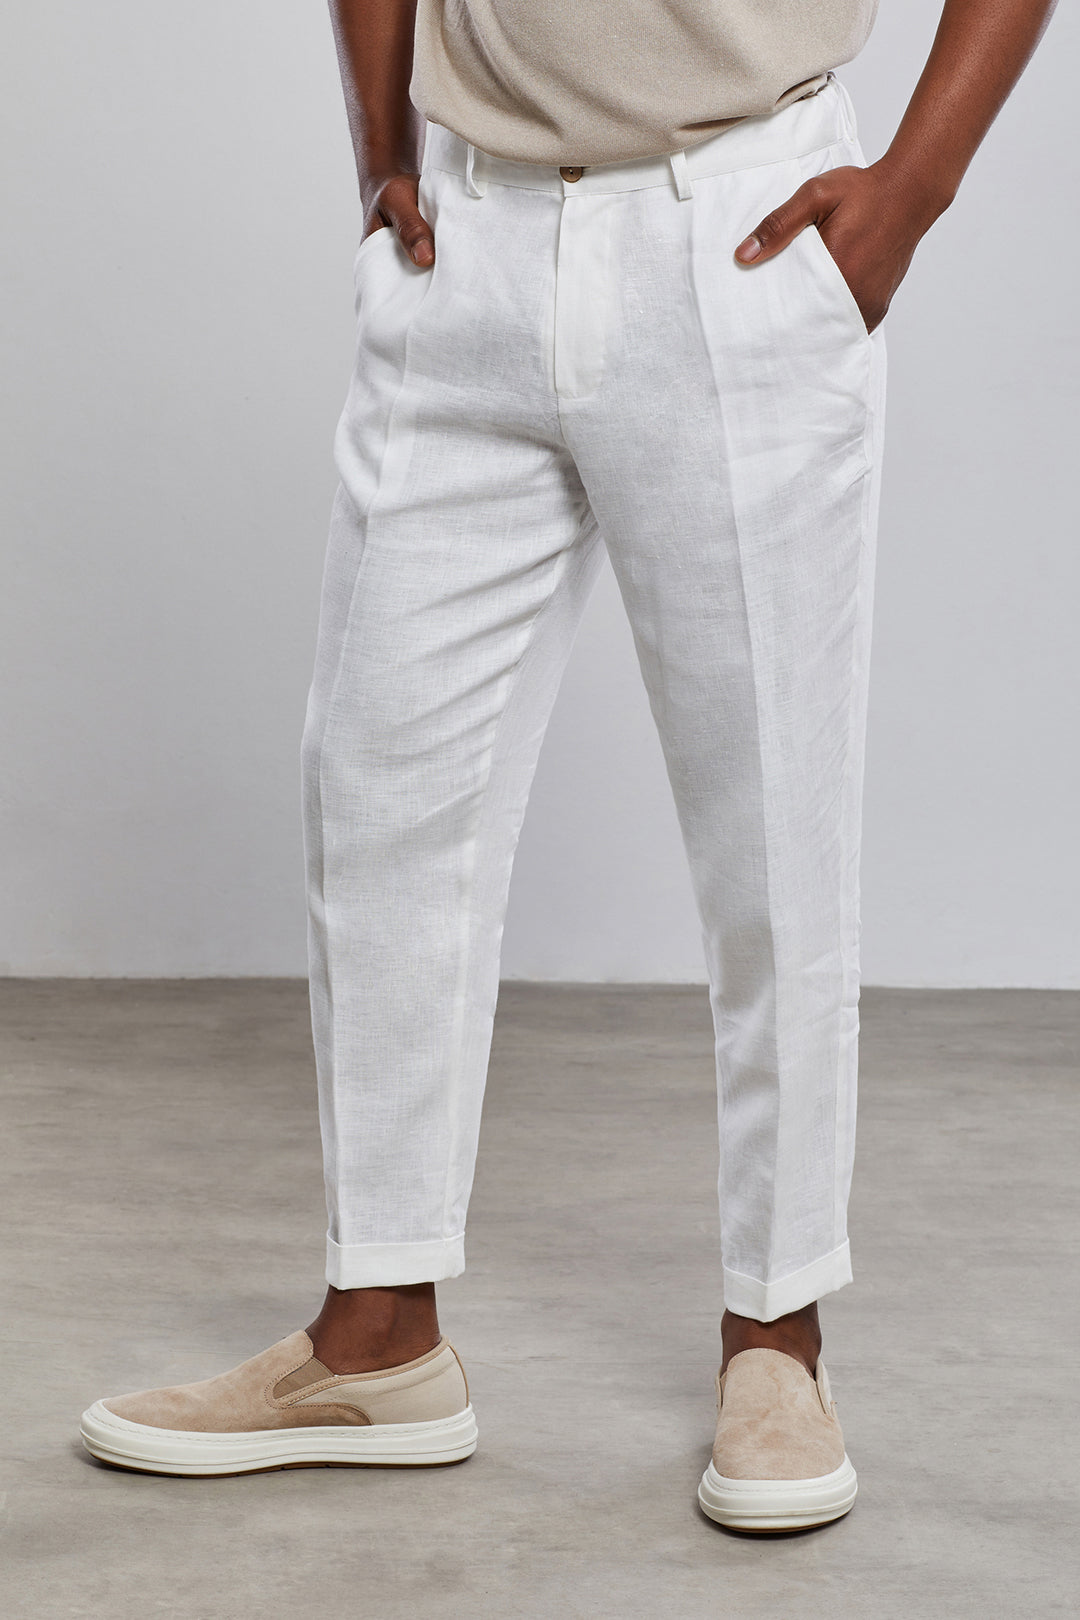 White Deluxe Carrot Fit Chino %100 Linen Pants